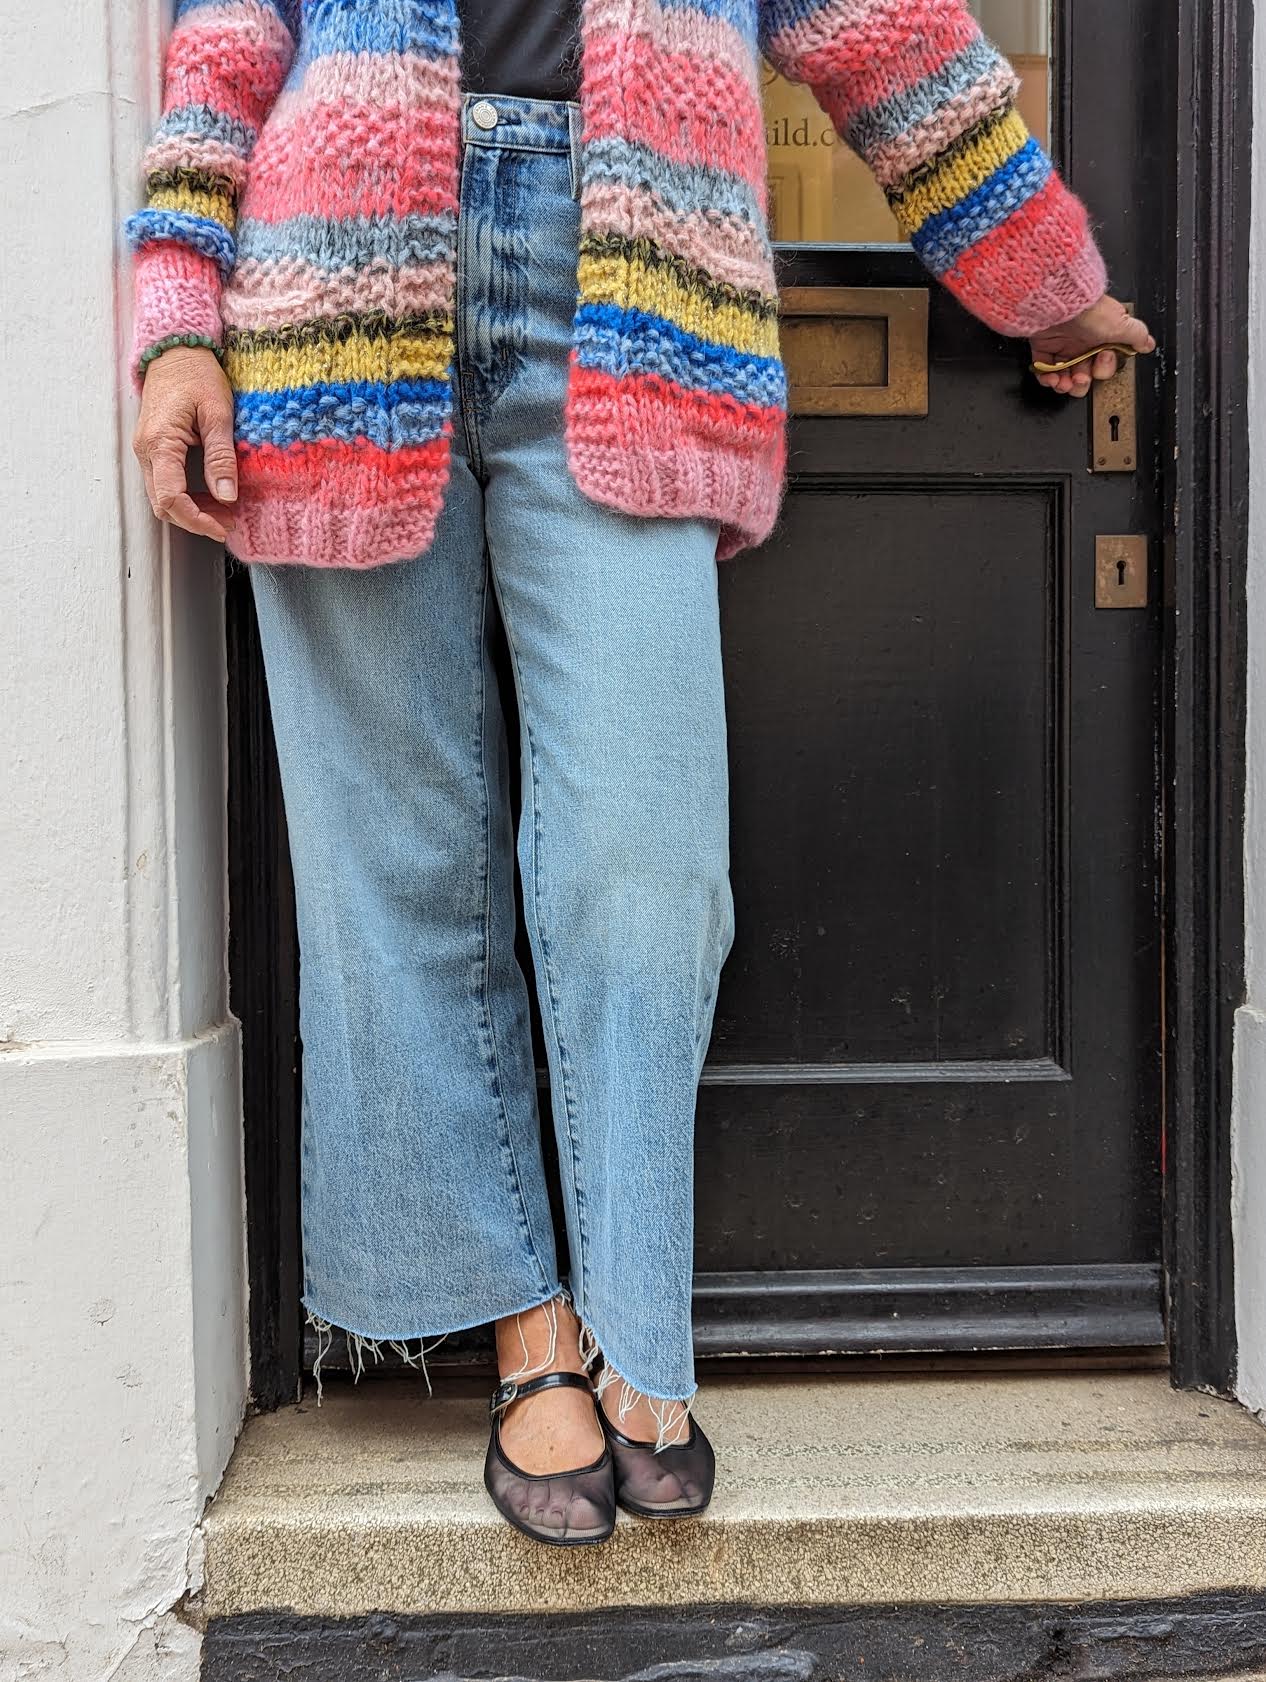 DawnxDare - Mars Pink & Blue Multi-Coloured Cardigan worn with Frame Jeans outside 32 The Guild